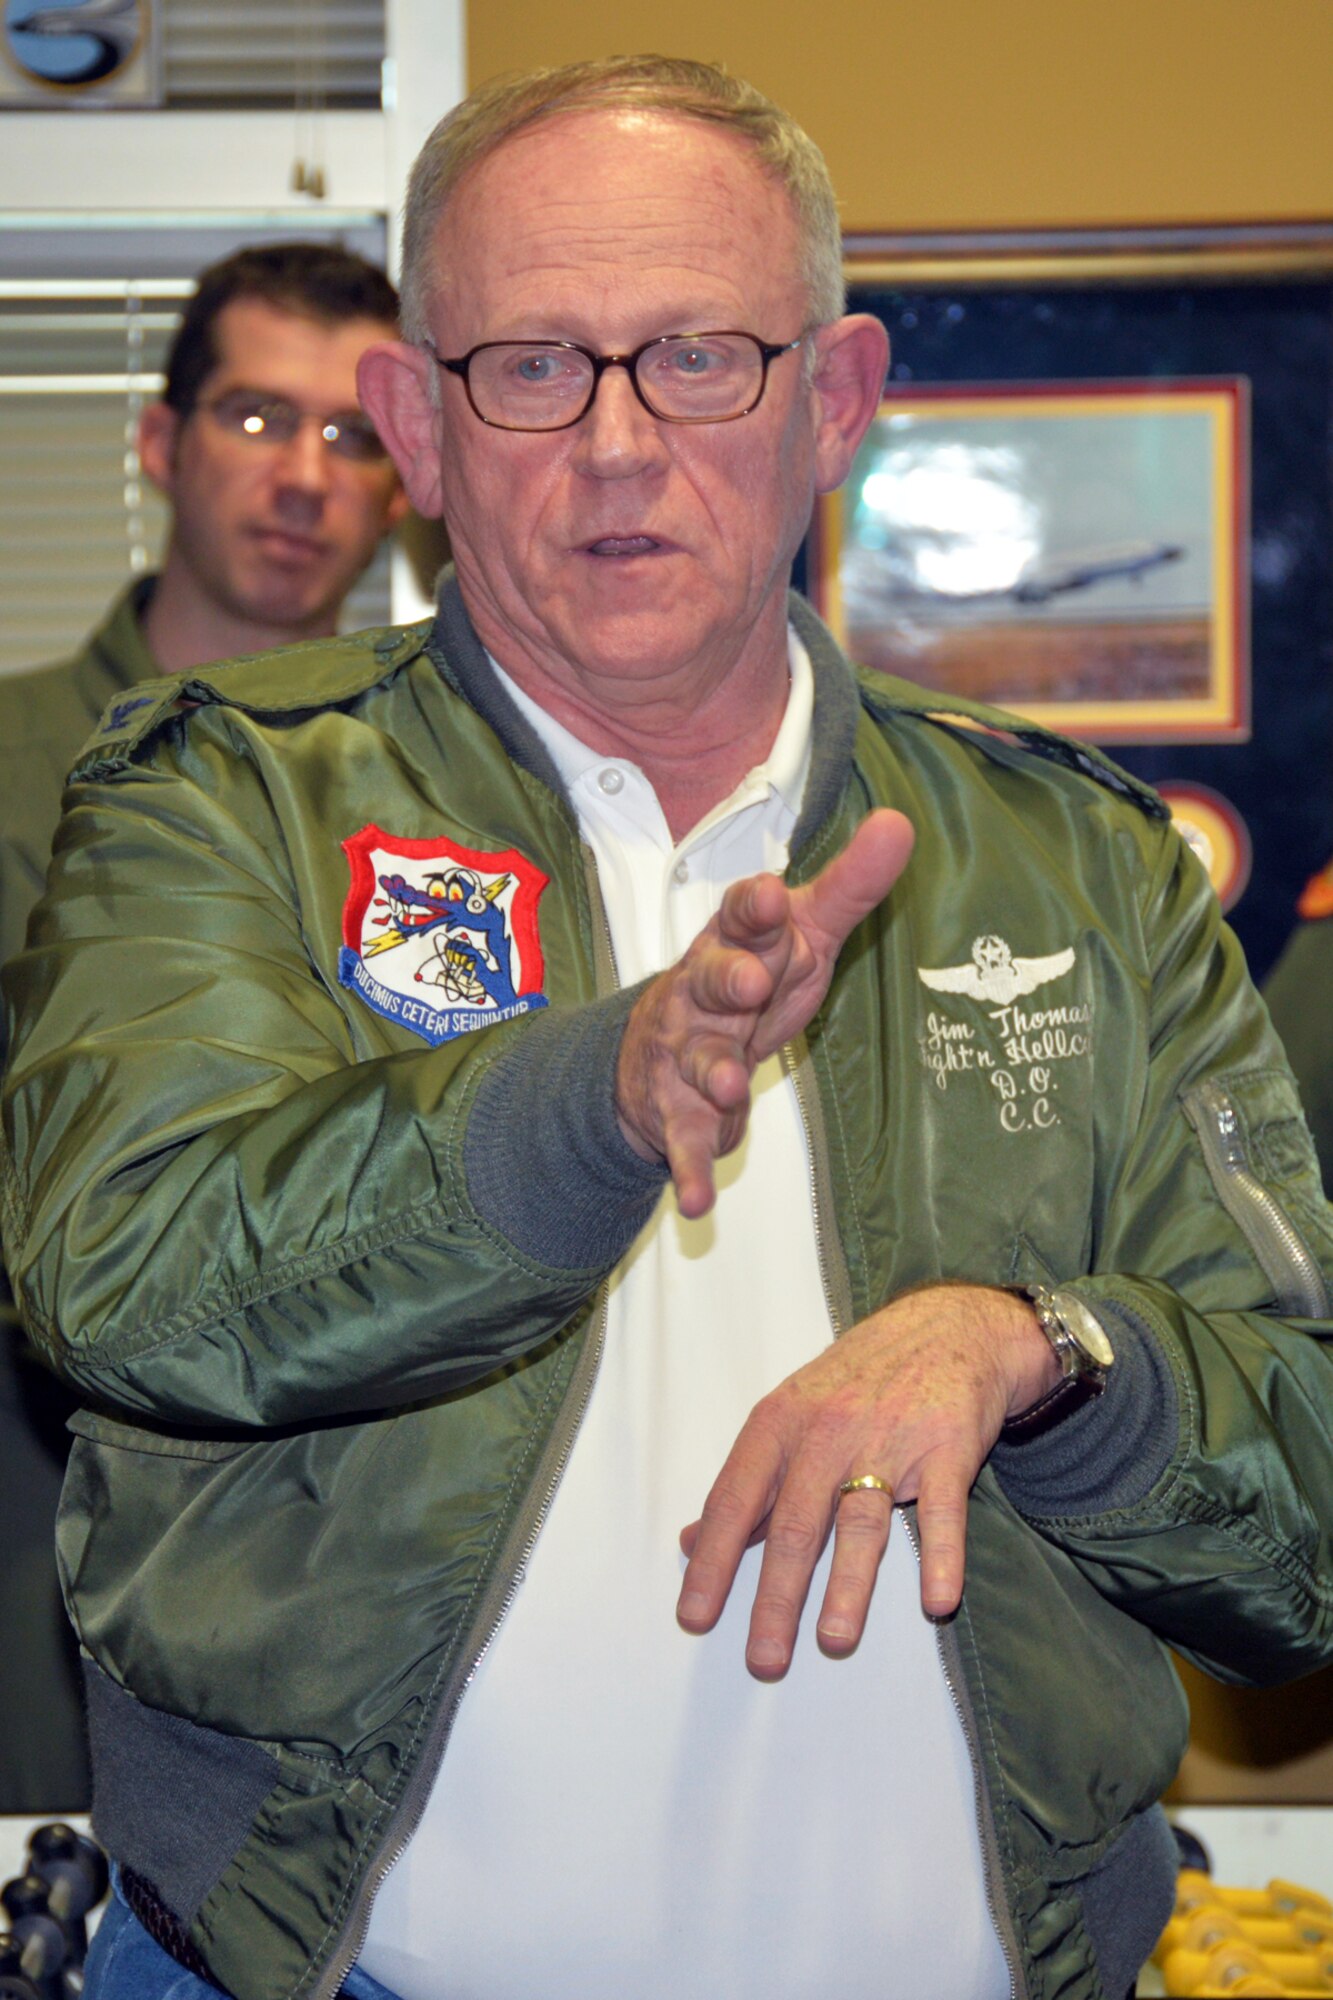 Retired U.S. Air Force Col. Jim Thomas, 55th Wing Association president, talks to Airmen about his experiences with the 55th Wing during a heritage event at the 97th Intelligence Squadron Feb. 5. The event was the first in a series of events that will lead up to the 55th Wing Birthday Ball May 21. (U.S. Air Force photo by Kendra Williams)